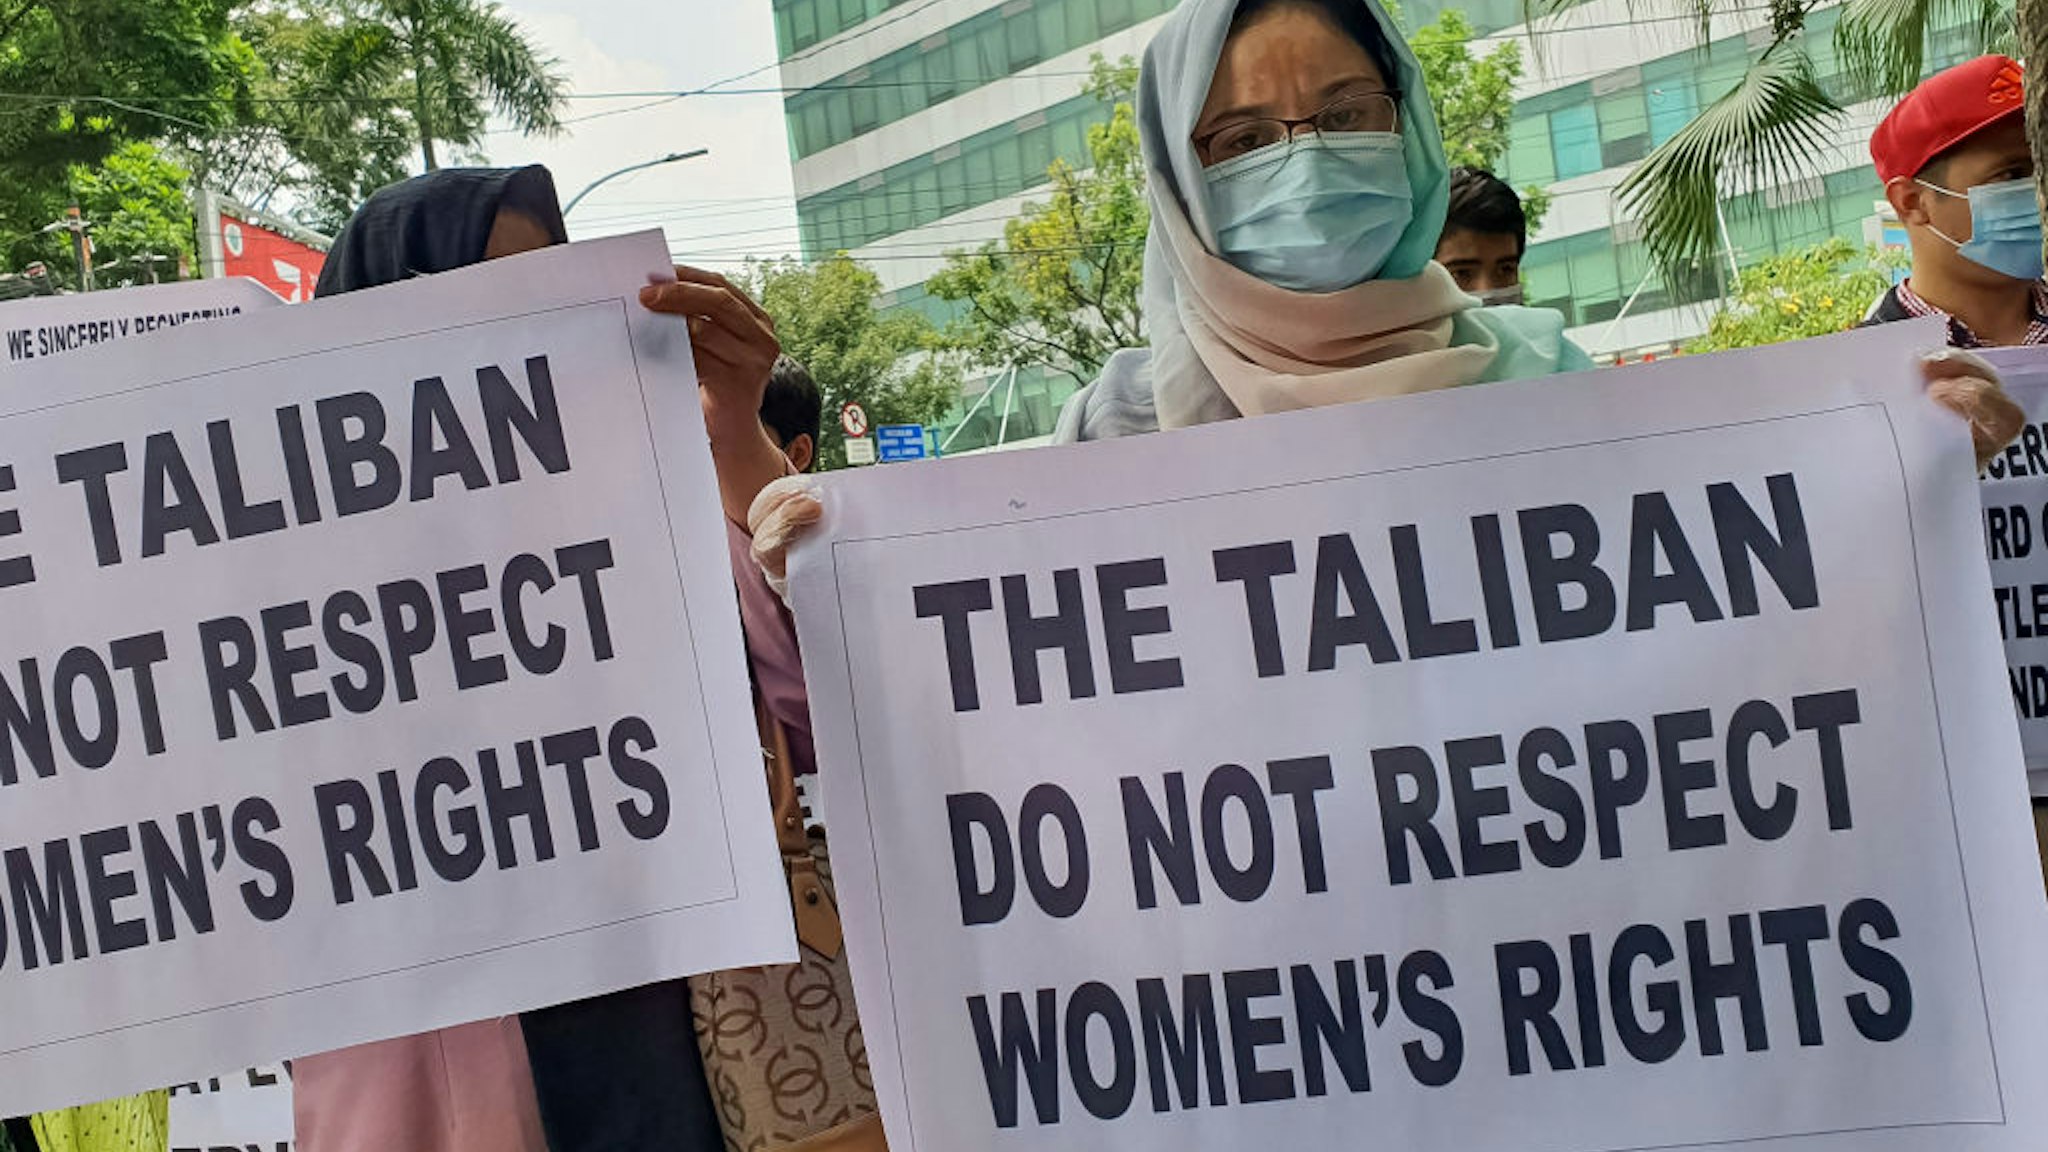 Afghan immigrants stage a protest in front of the UNHCR representative office in Medan, North Sumatra, on September 7, 2021, criticizing the Taliban's takeover of Afghanistan that does not respect women's rights.